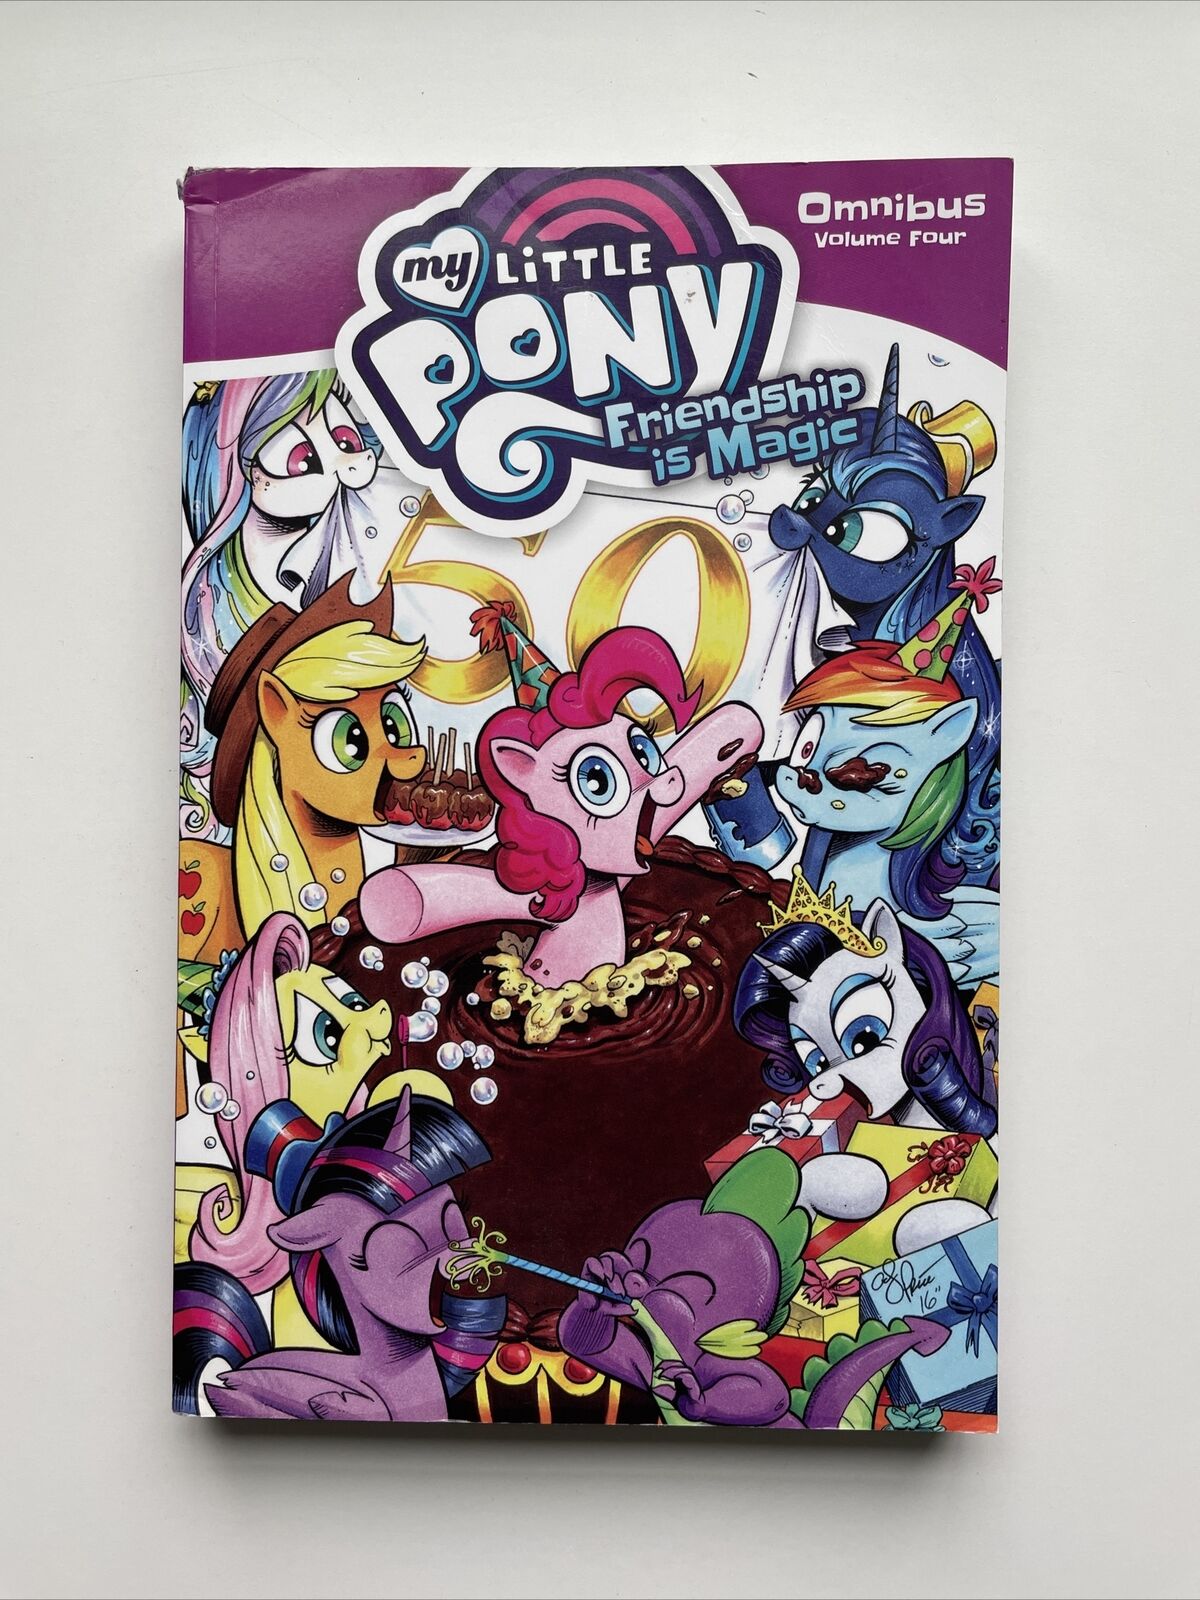 My Little Pony: Friendship is Magic Omnibus Volume Four Trade Paperback, 2018 #N